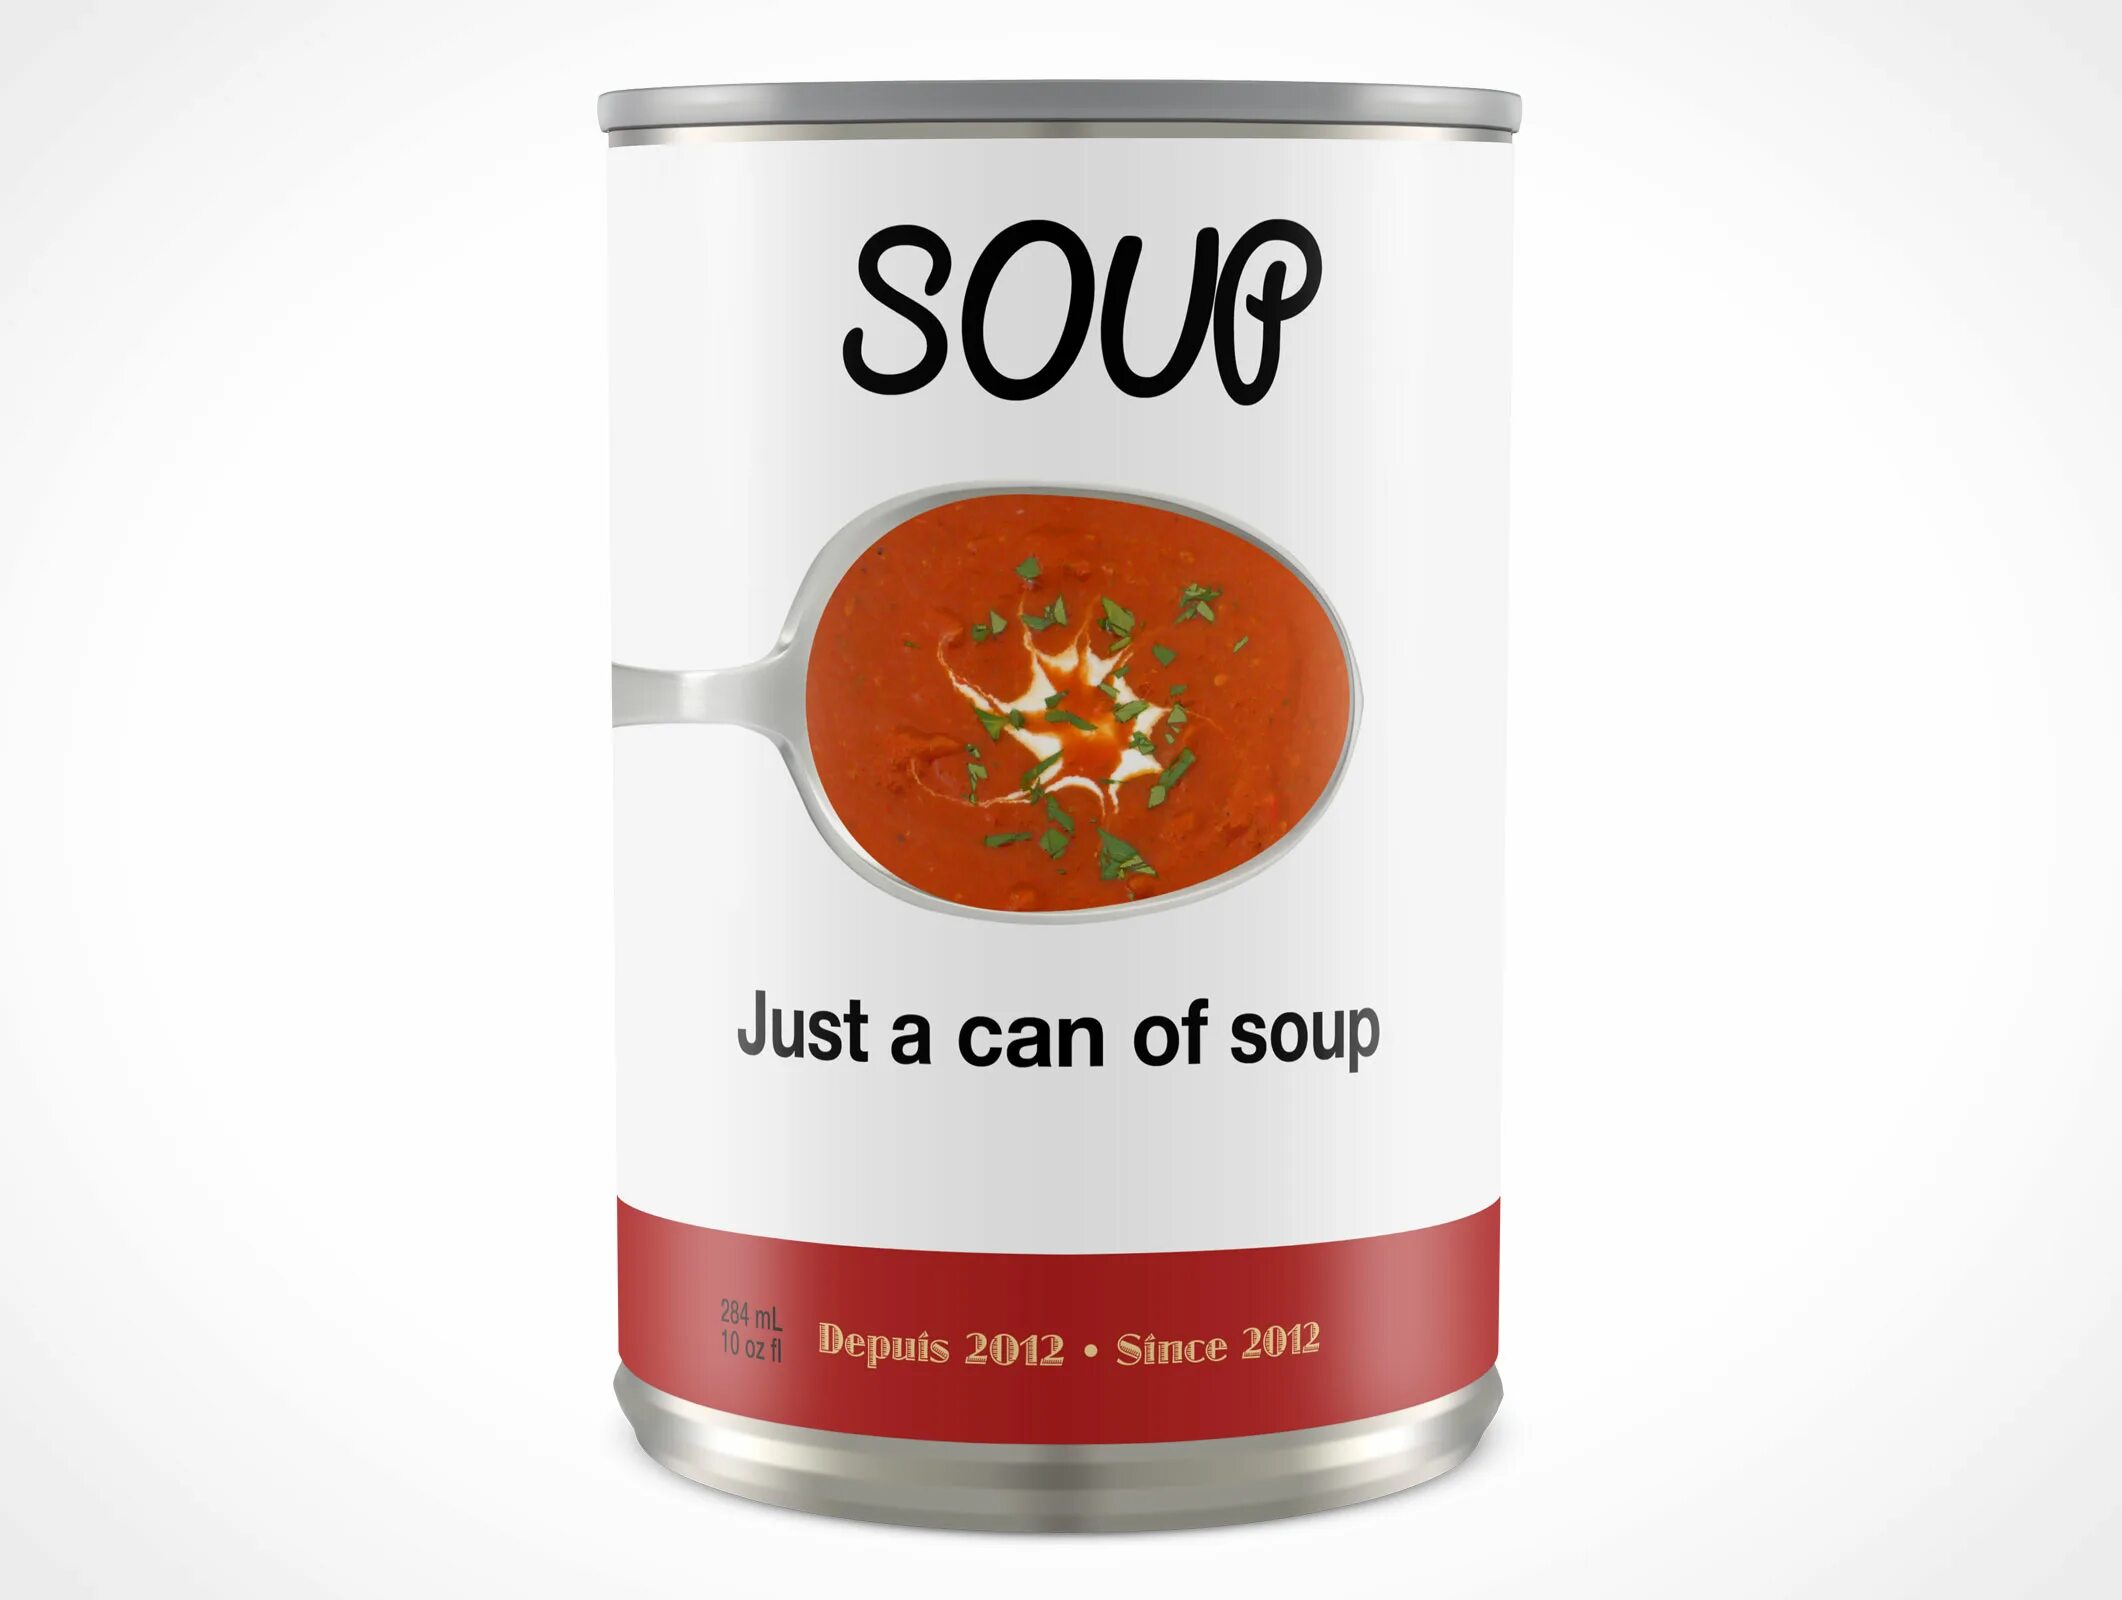 Soup cans. Can of Soup. Can. Campbell Soup can. Soup in can.